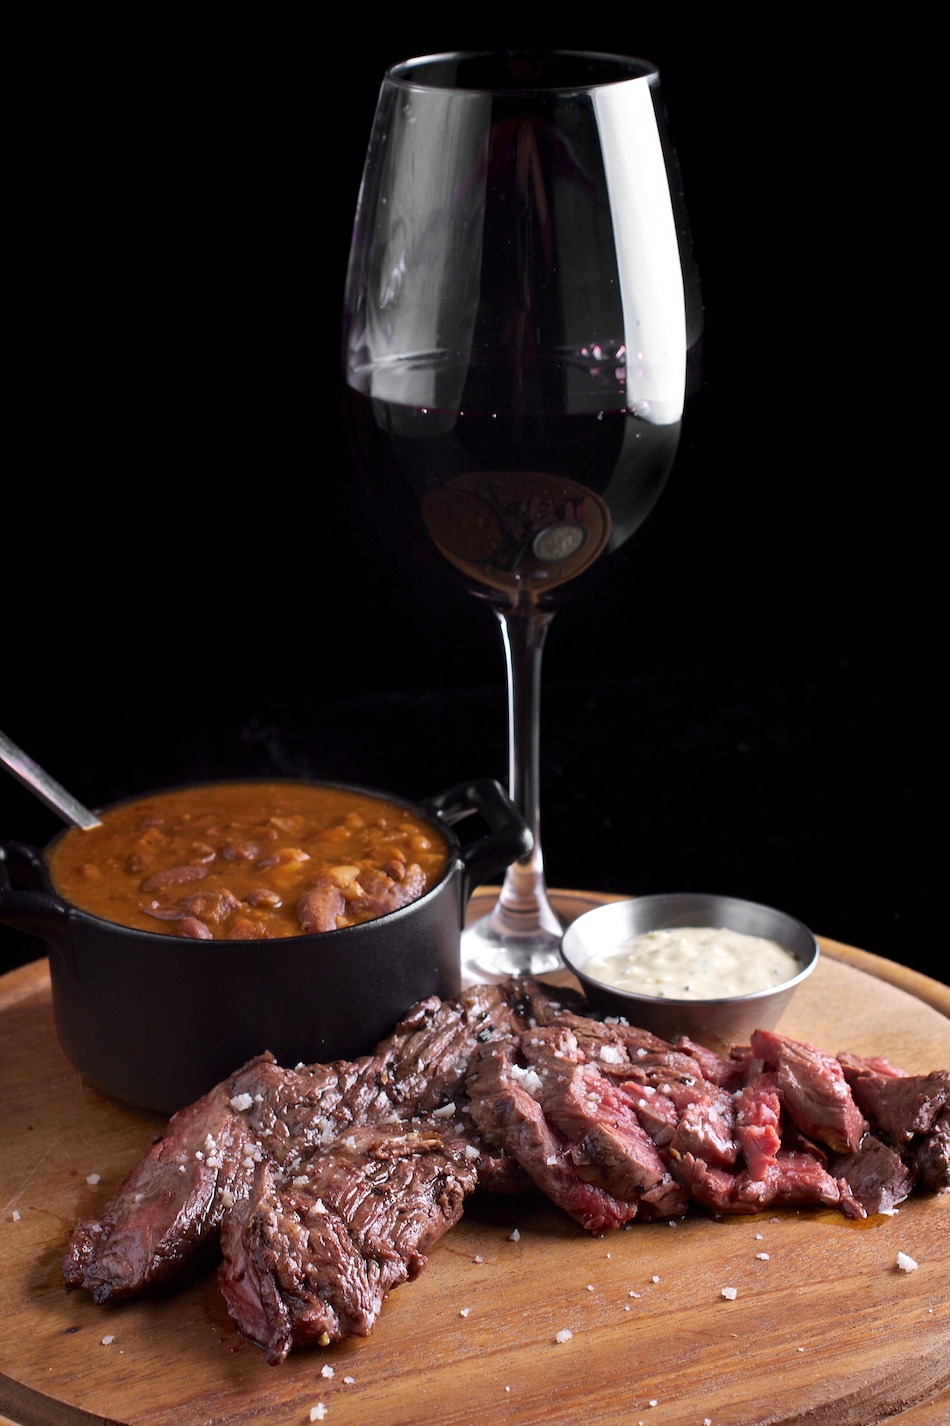 Add Some Sizzle to Your Next Dinner Party with This Mouth-watering Combination of Red Wine Jus and Steak.